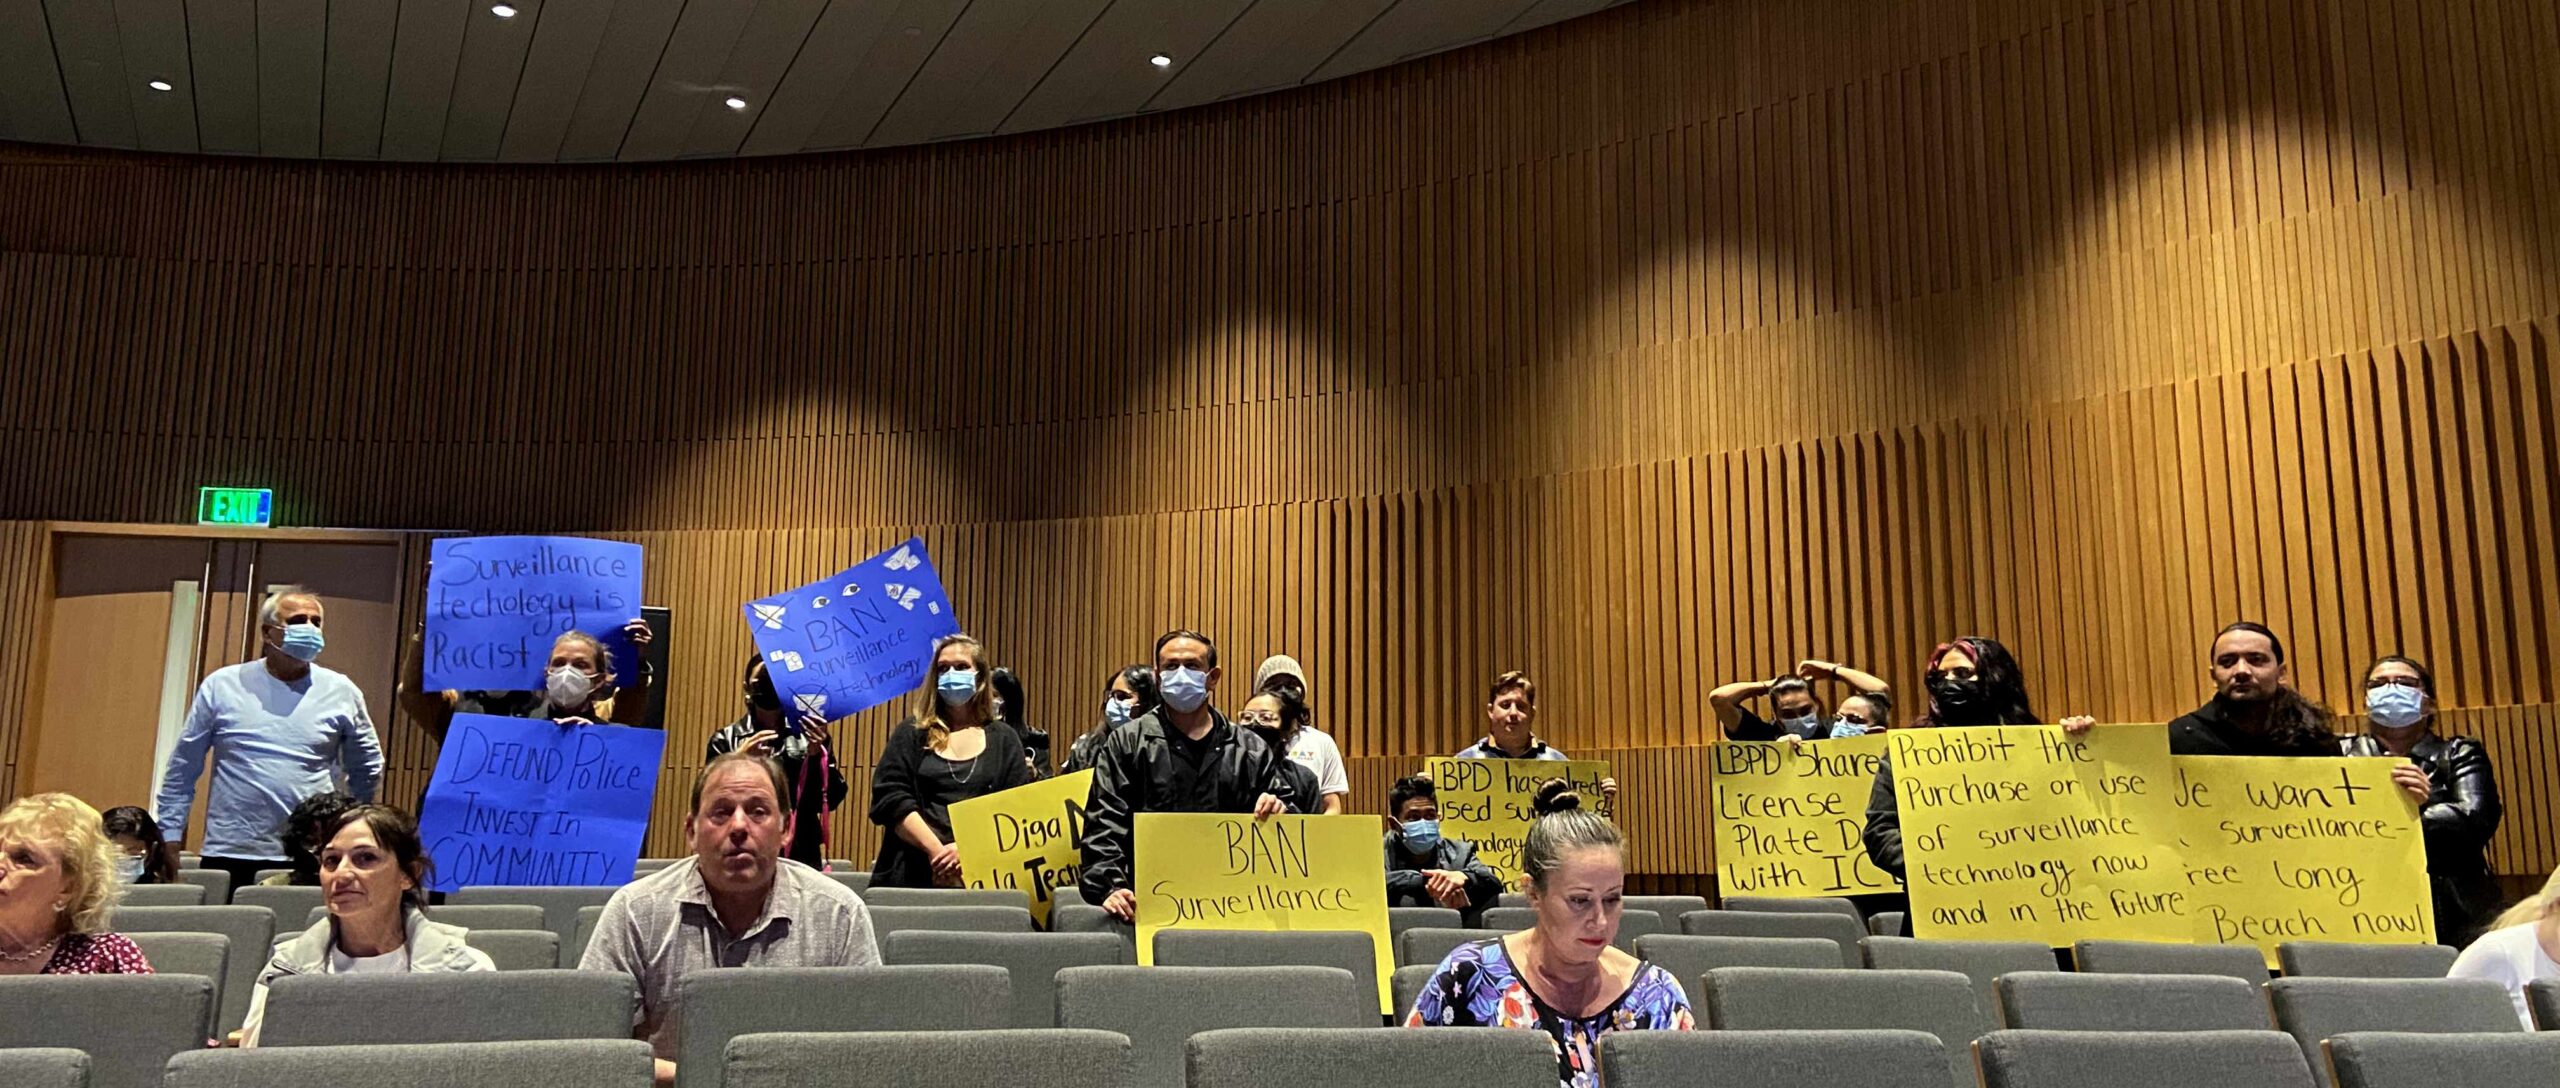 Long Beach residents and activists hold up signs protesting further purchases of Automated License Plate Readers by the Long Beach Police Department at the City Council meeting on Feb. 7, 2023.